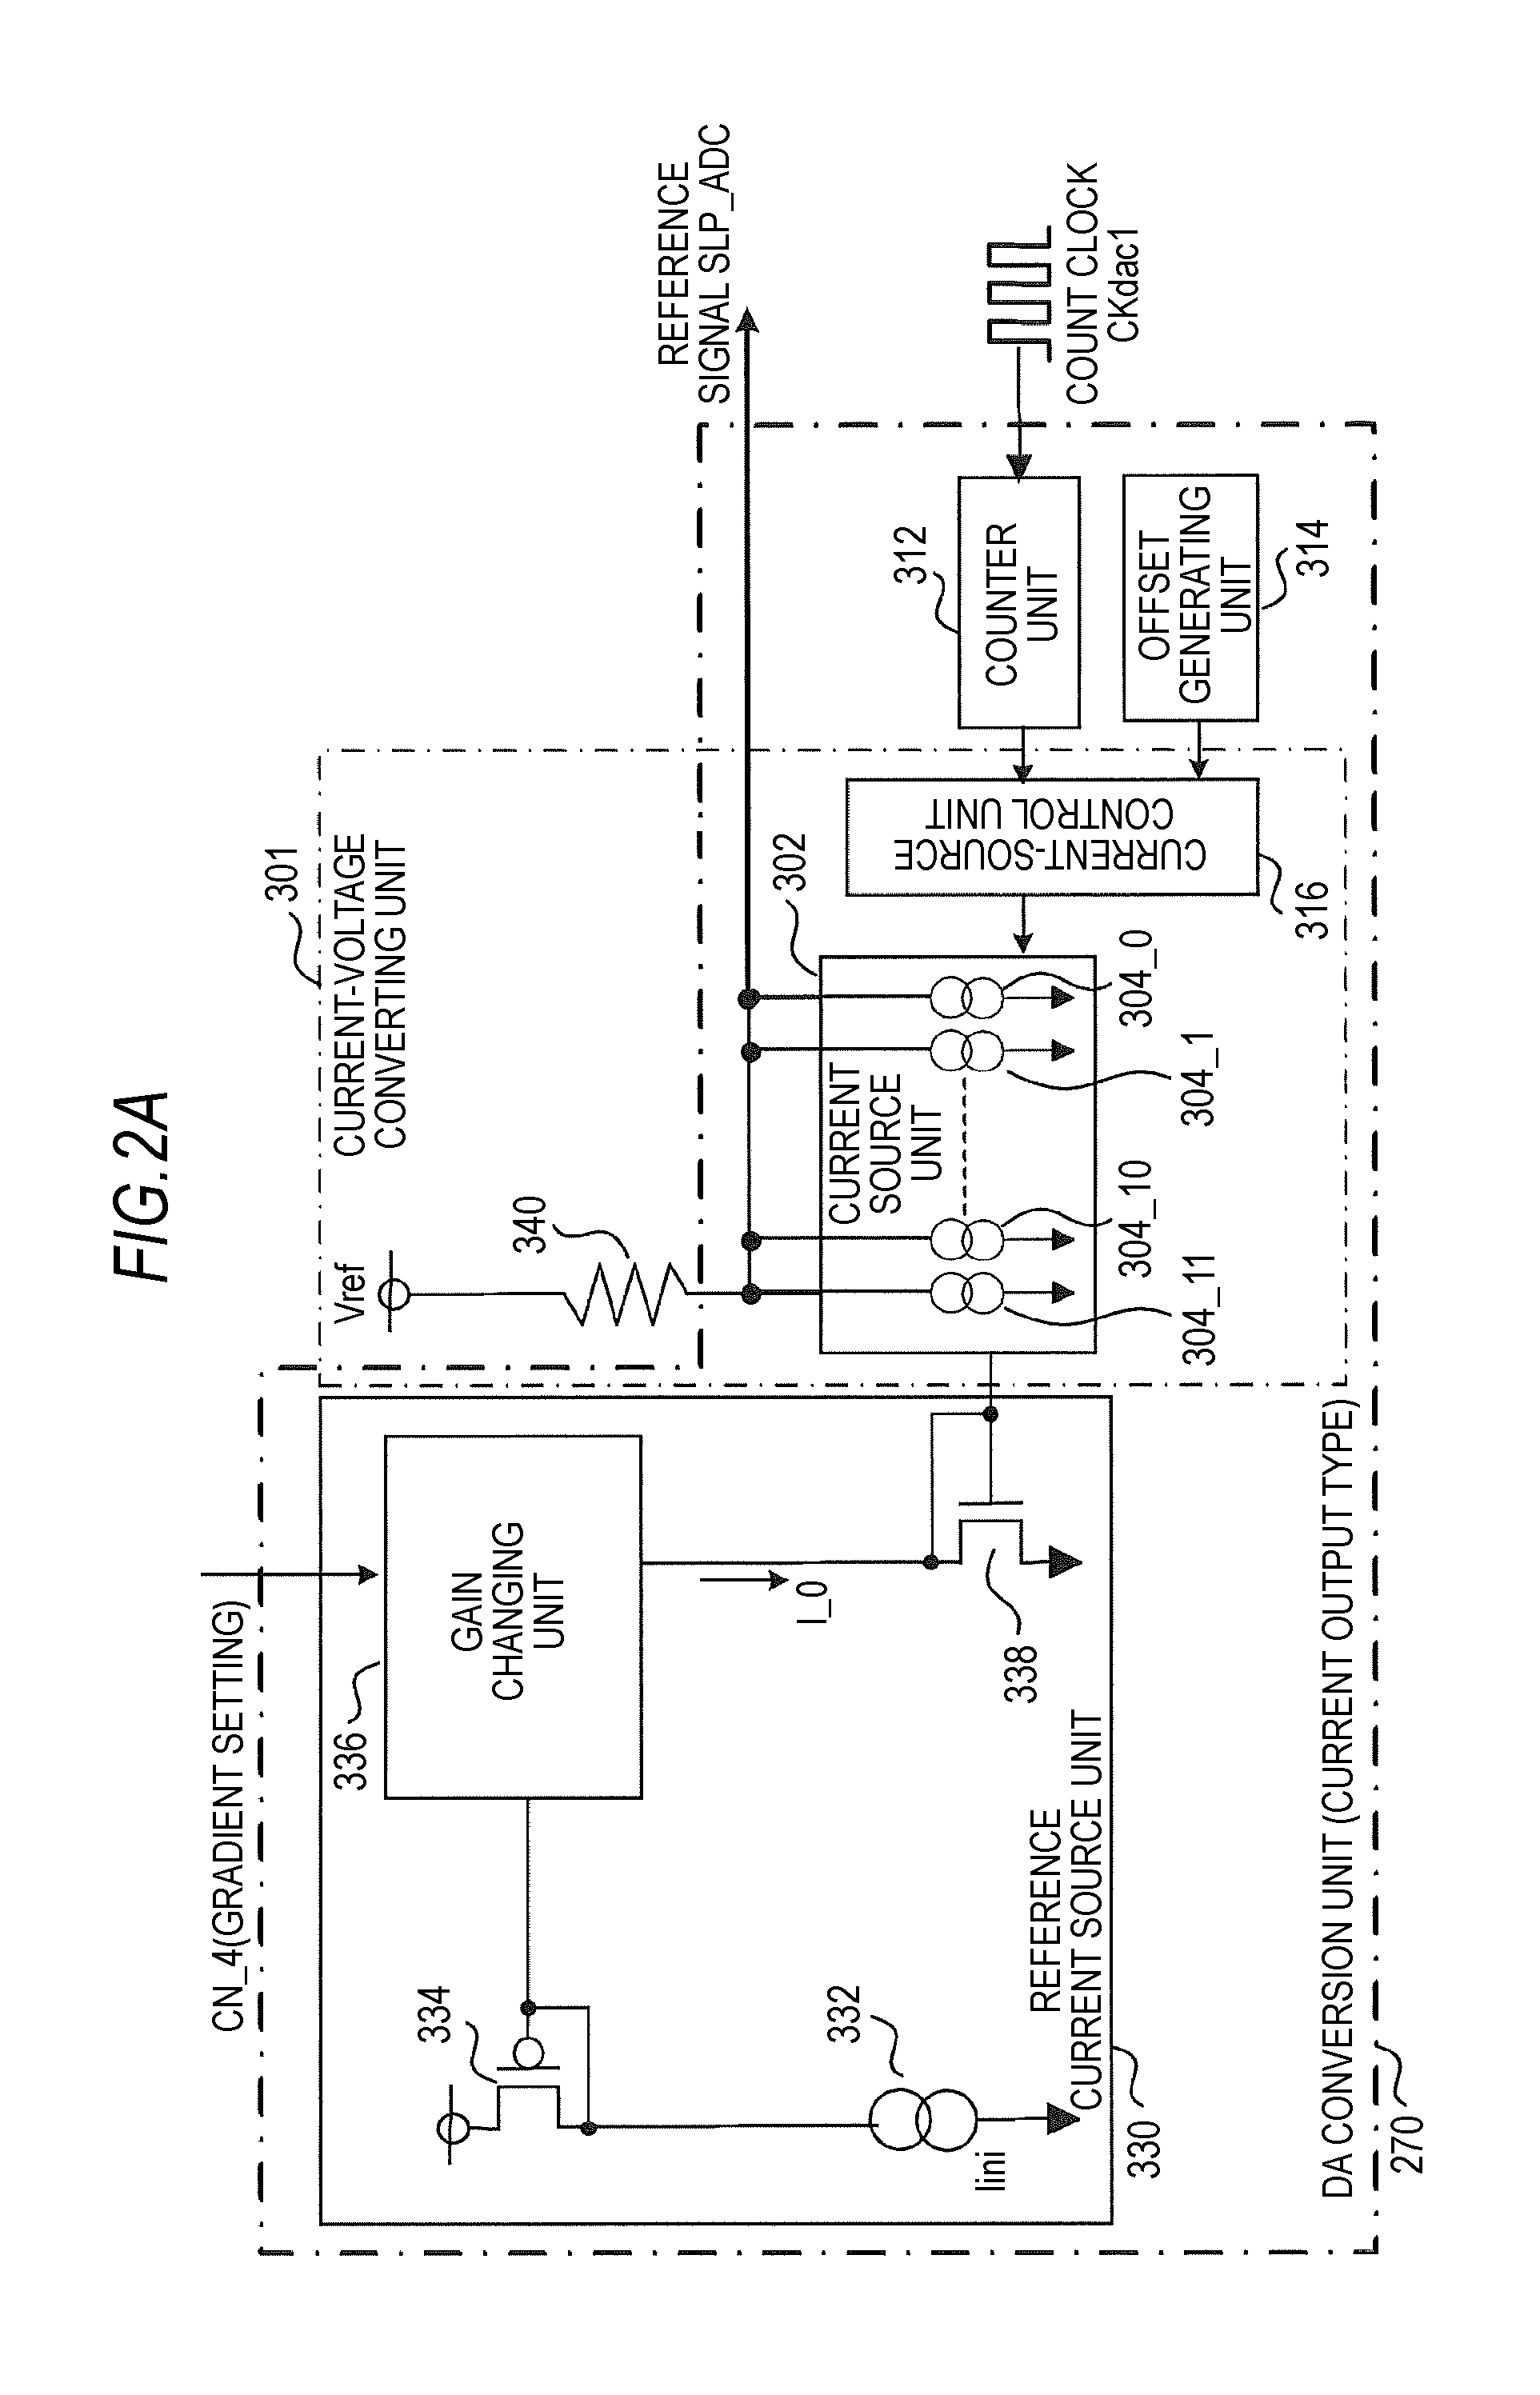 Solid-state imaging device, imaging apparatus, and ad conversion gain adjusting method